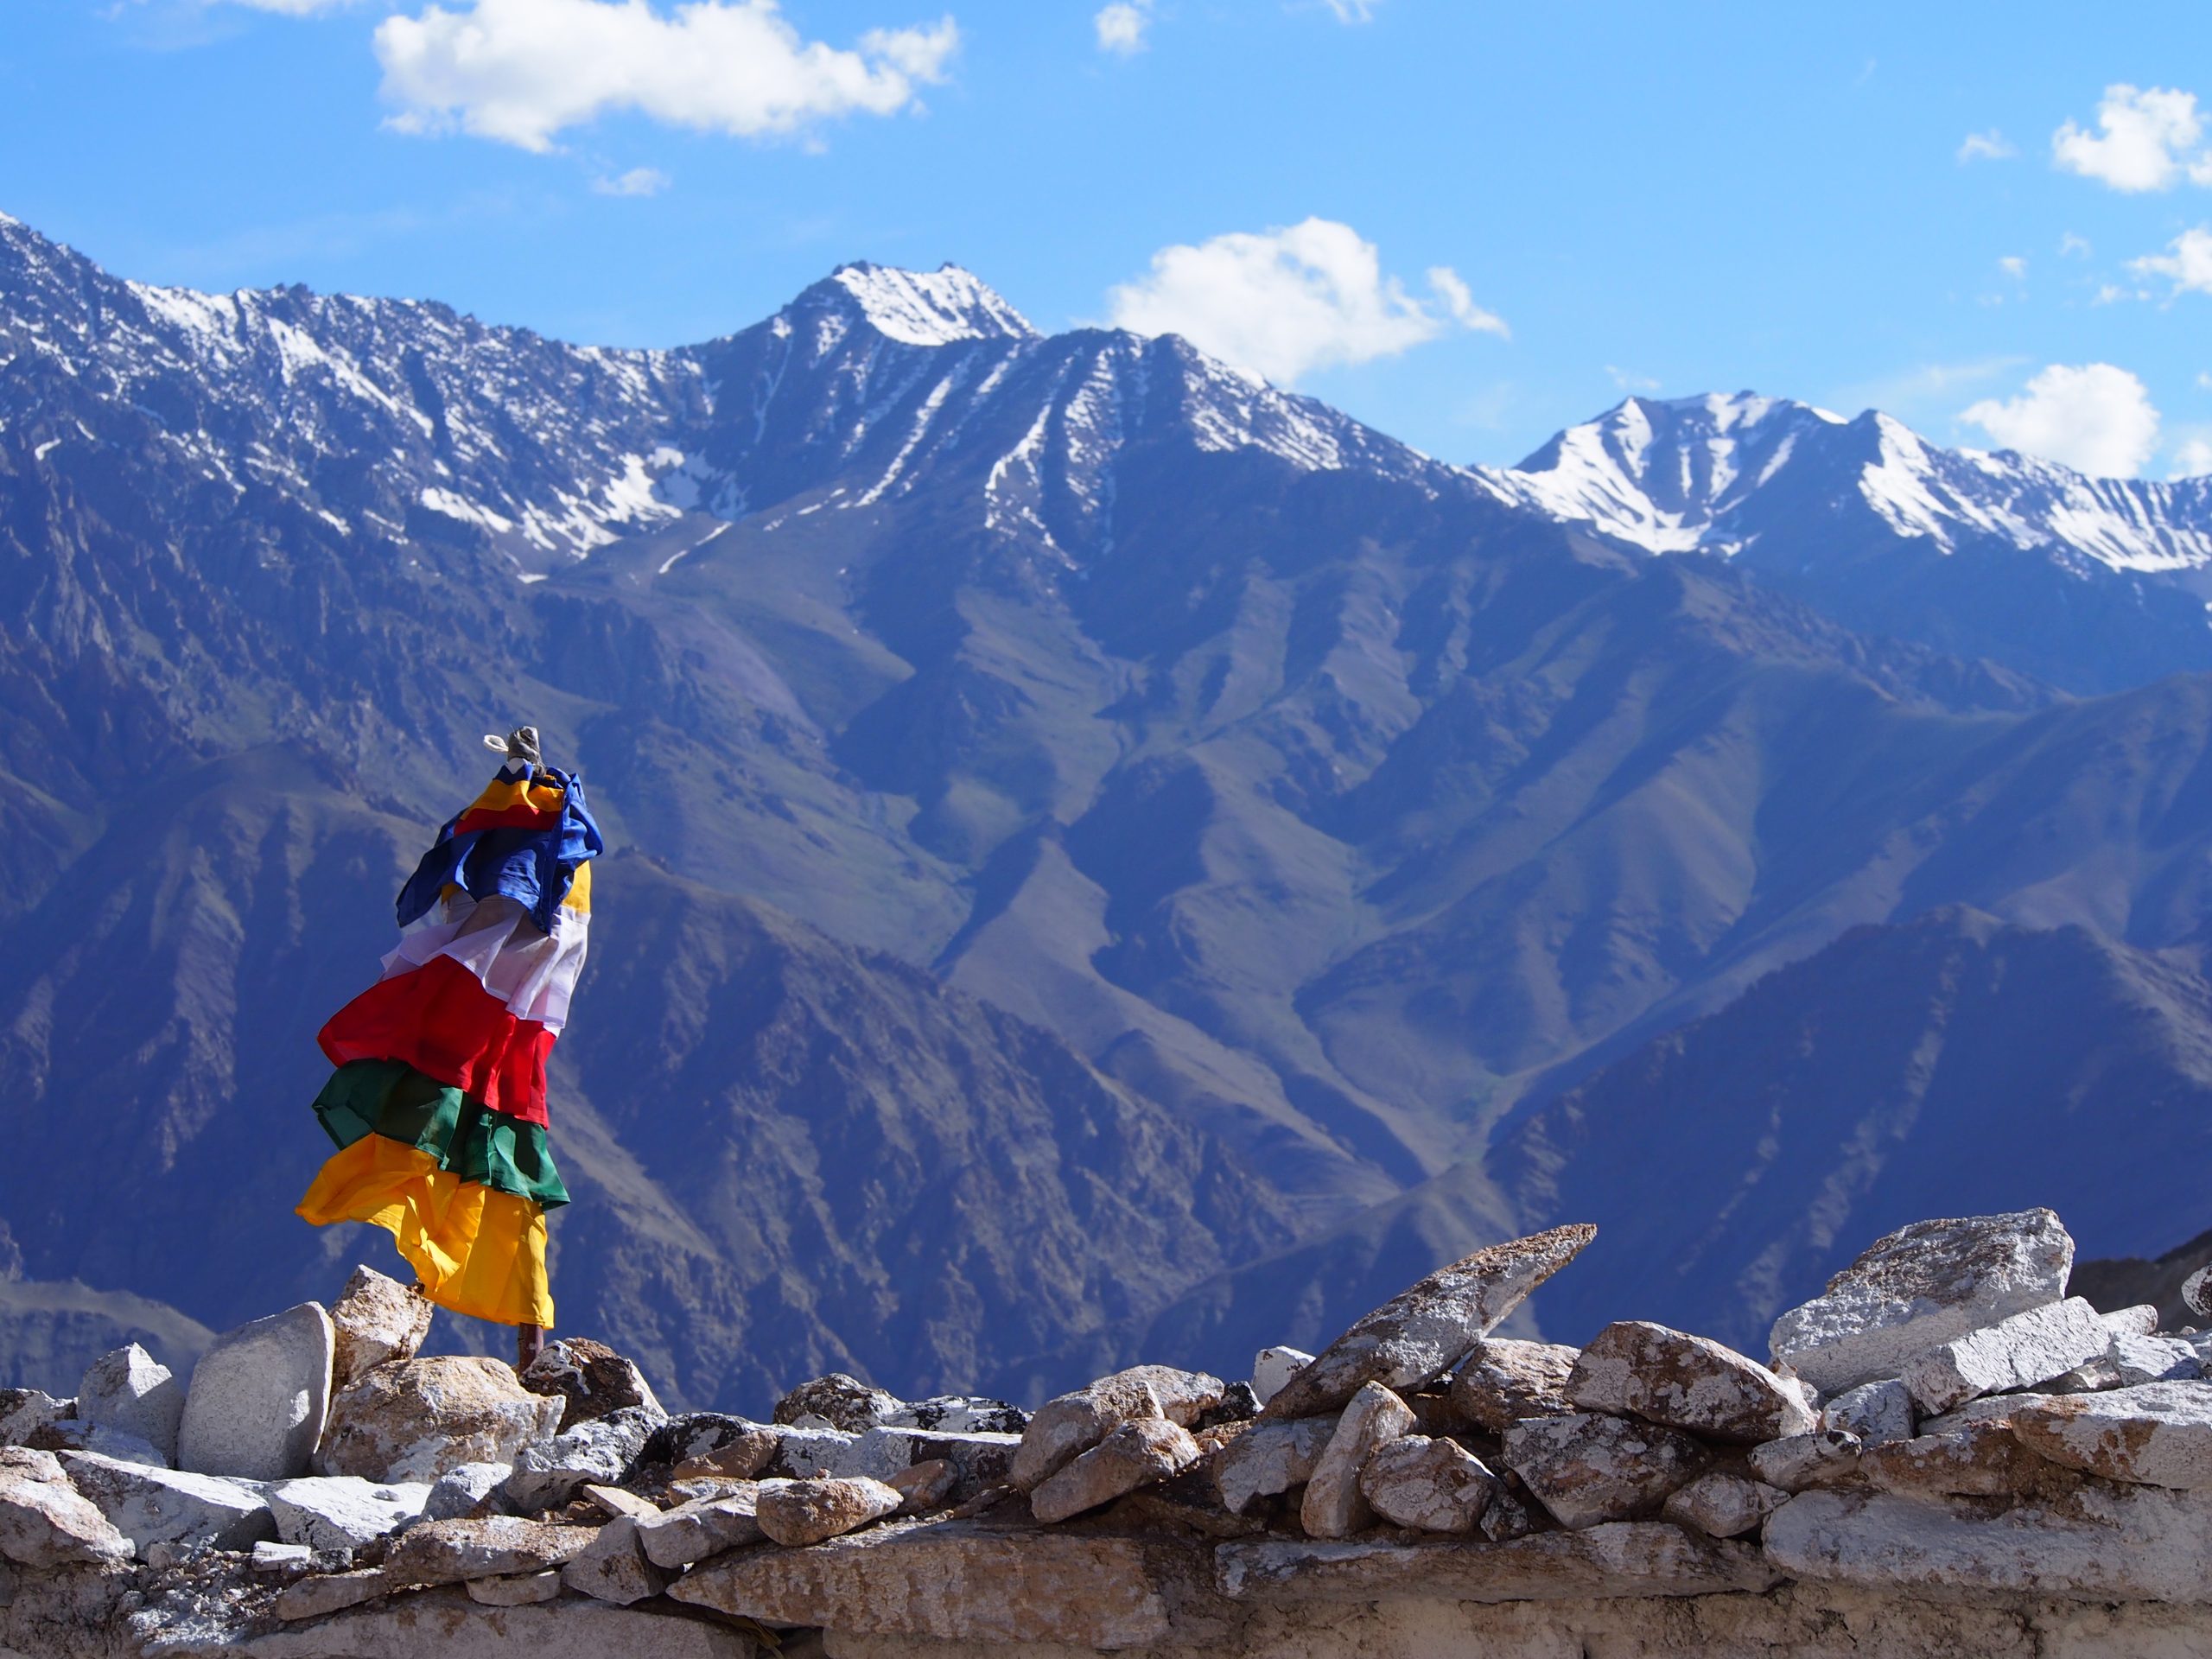 The Call of the Mountains: Himalayan Spiritual Travels